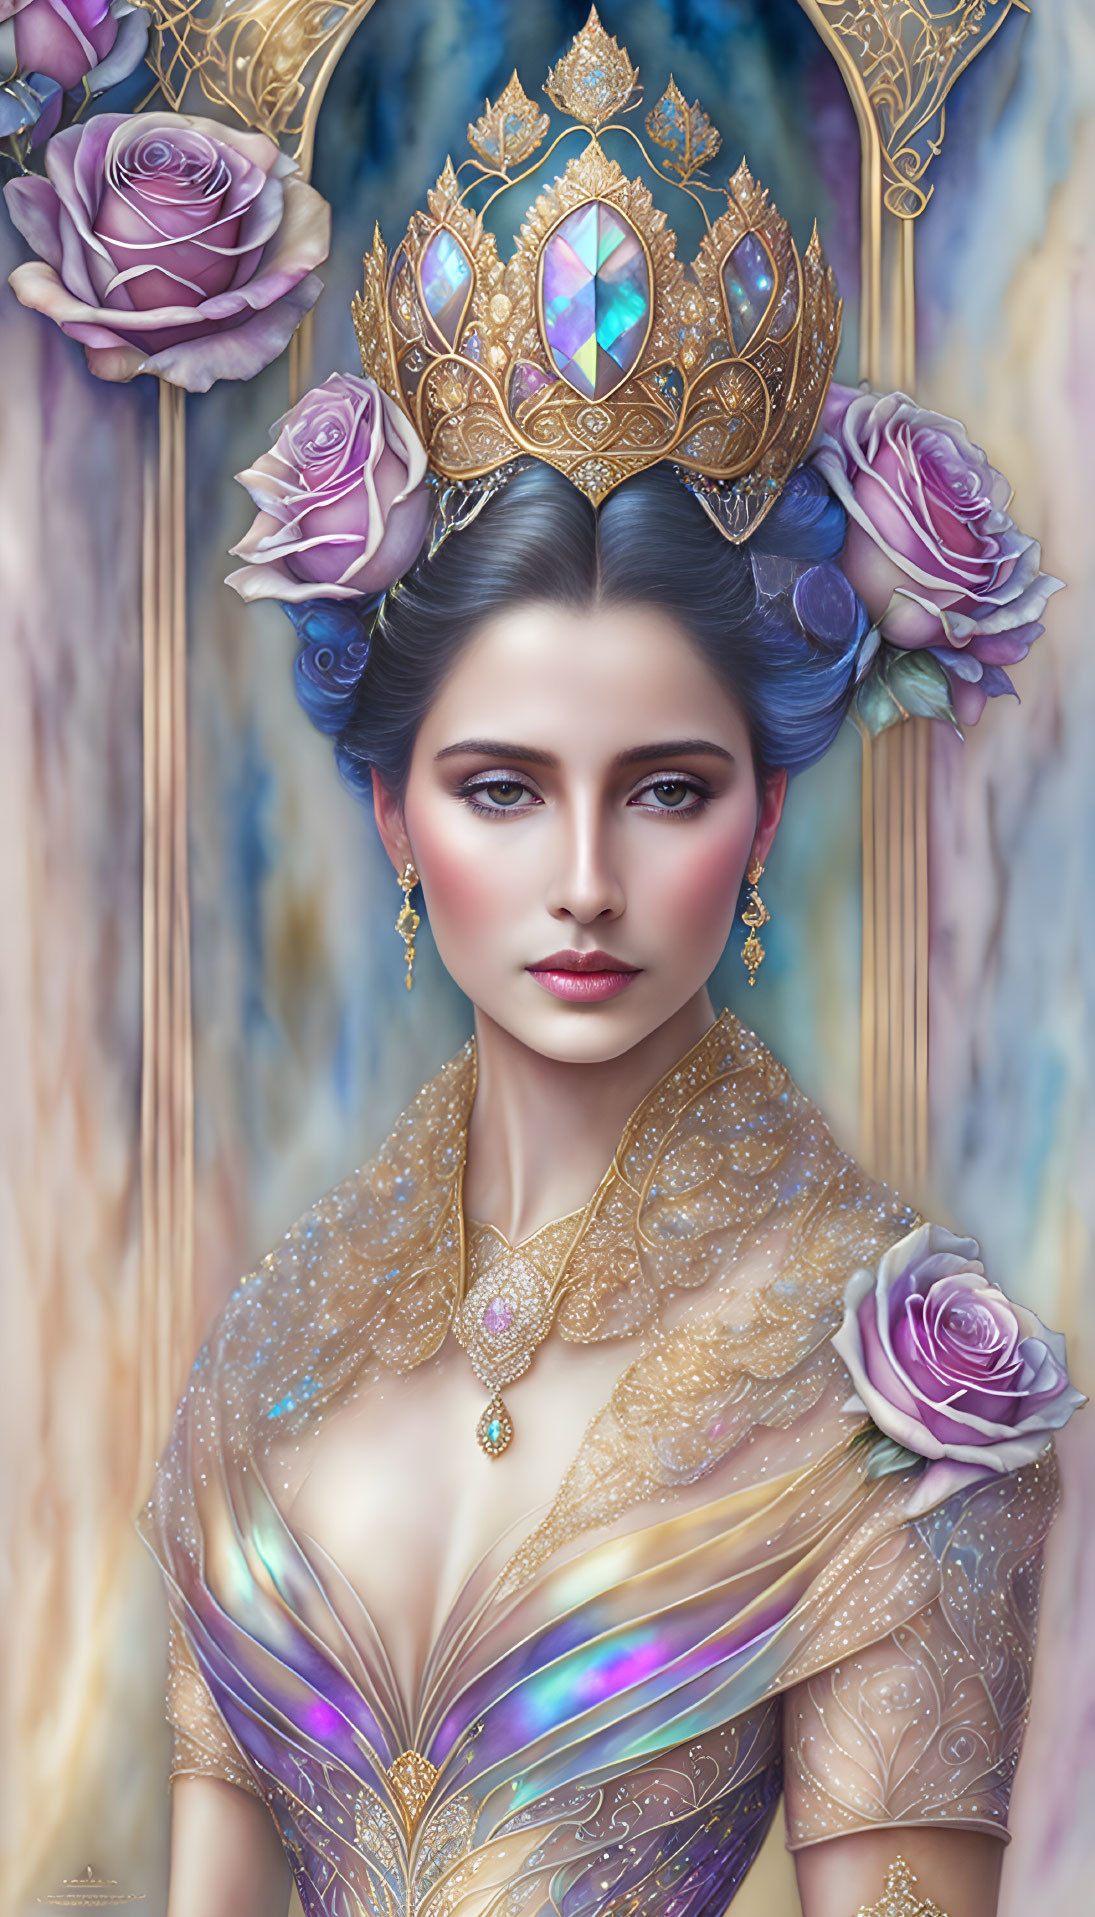 Regal woman illustration with gem-encrusted crown and gold gown